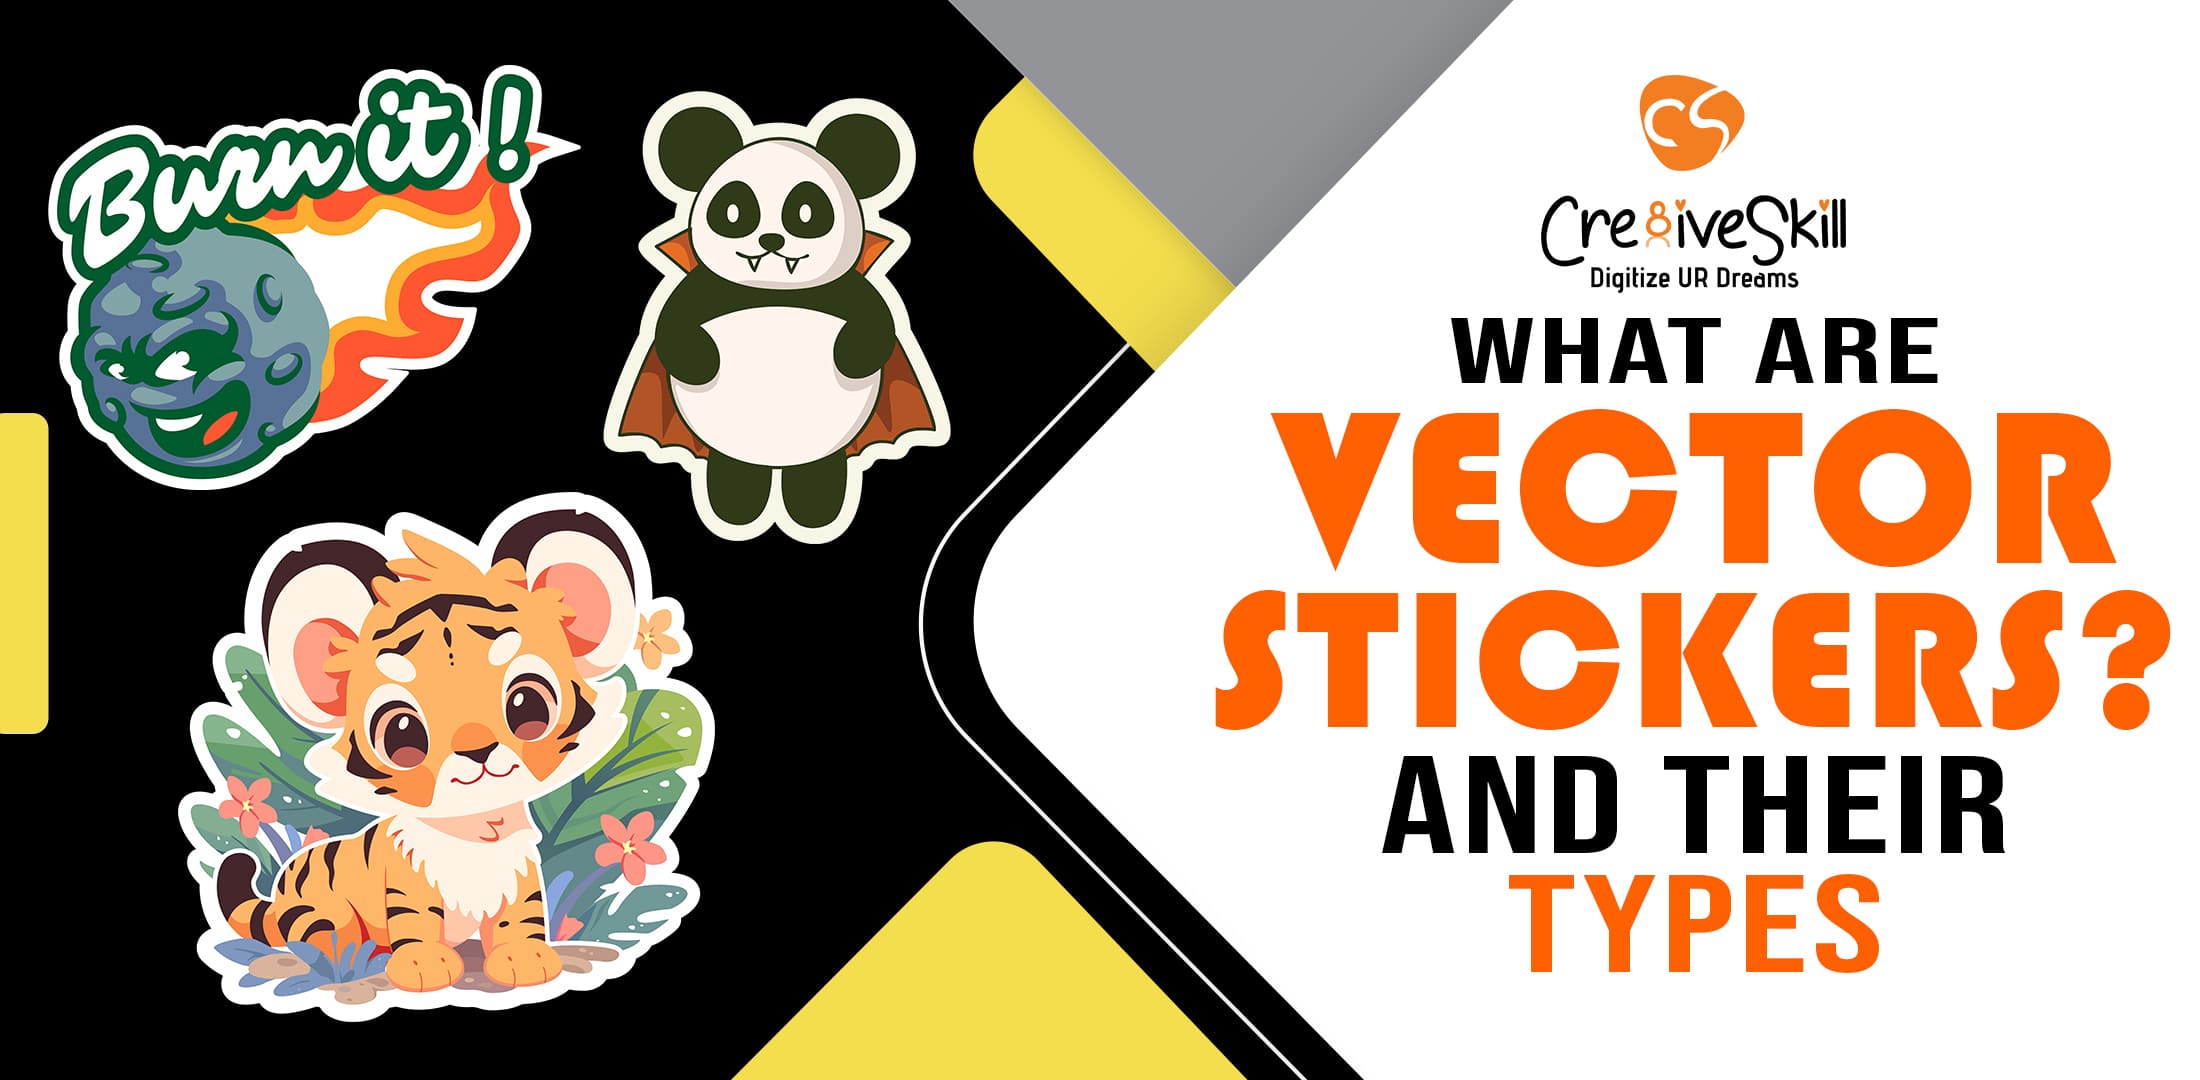 Explore Vector Stickers and the Different Types Available | Cre8iveSkill